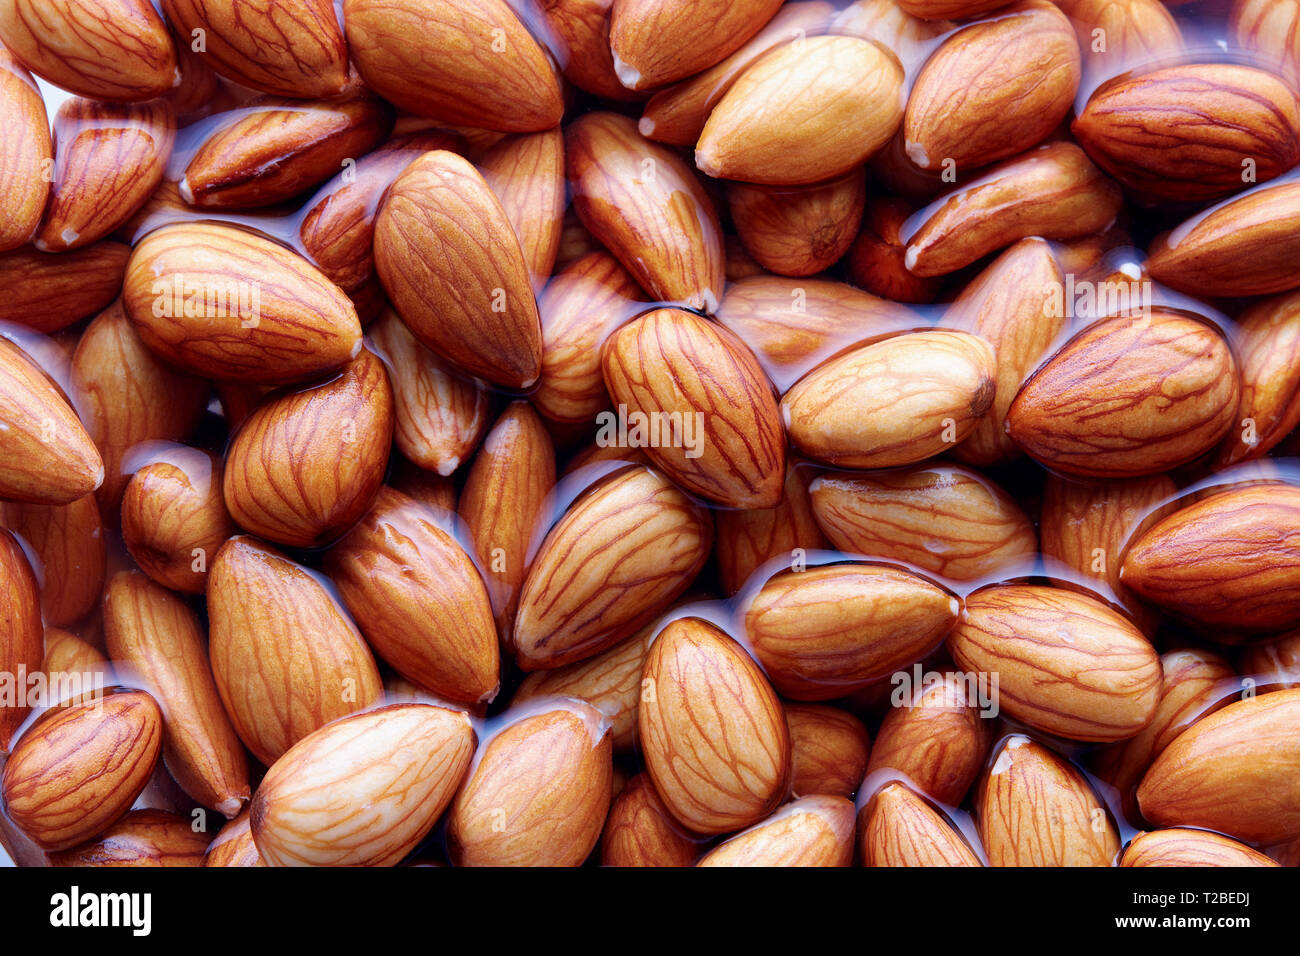 Soaking almonds in water. Almonds being softened in water to create almond milk. Stock Photo